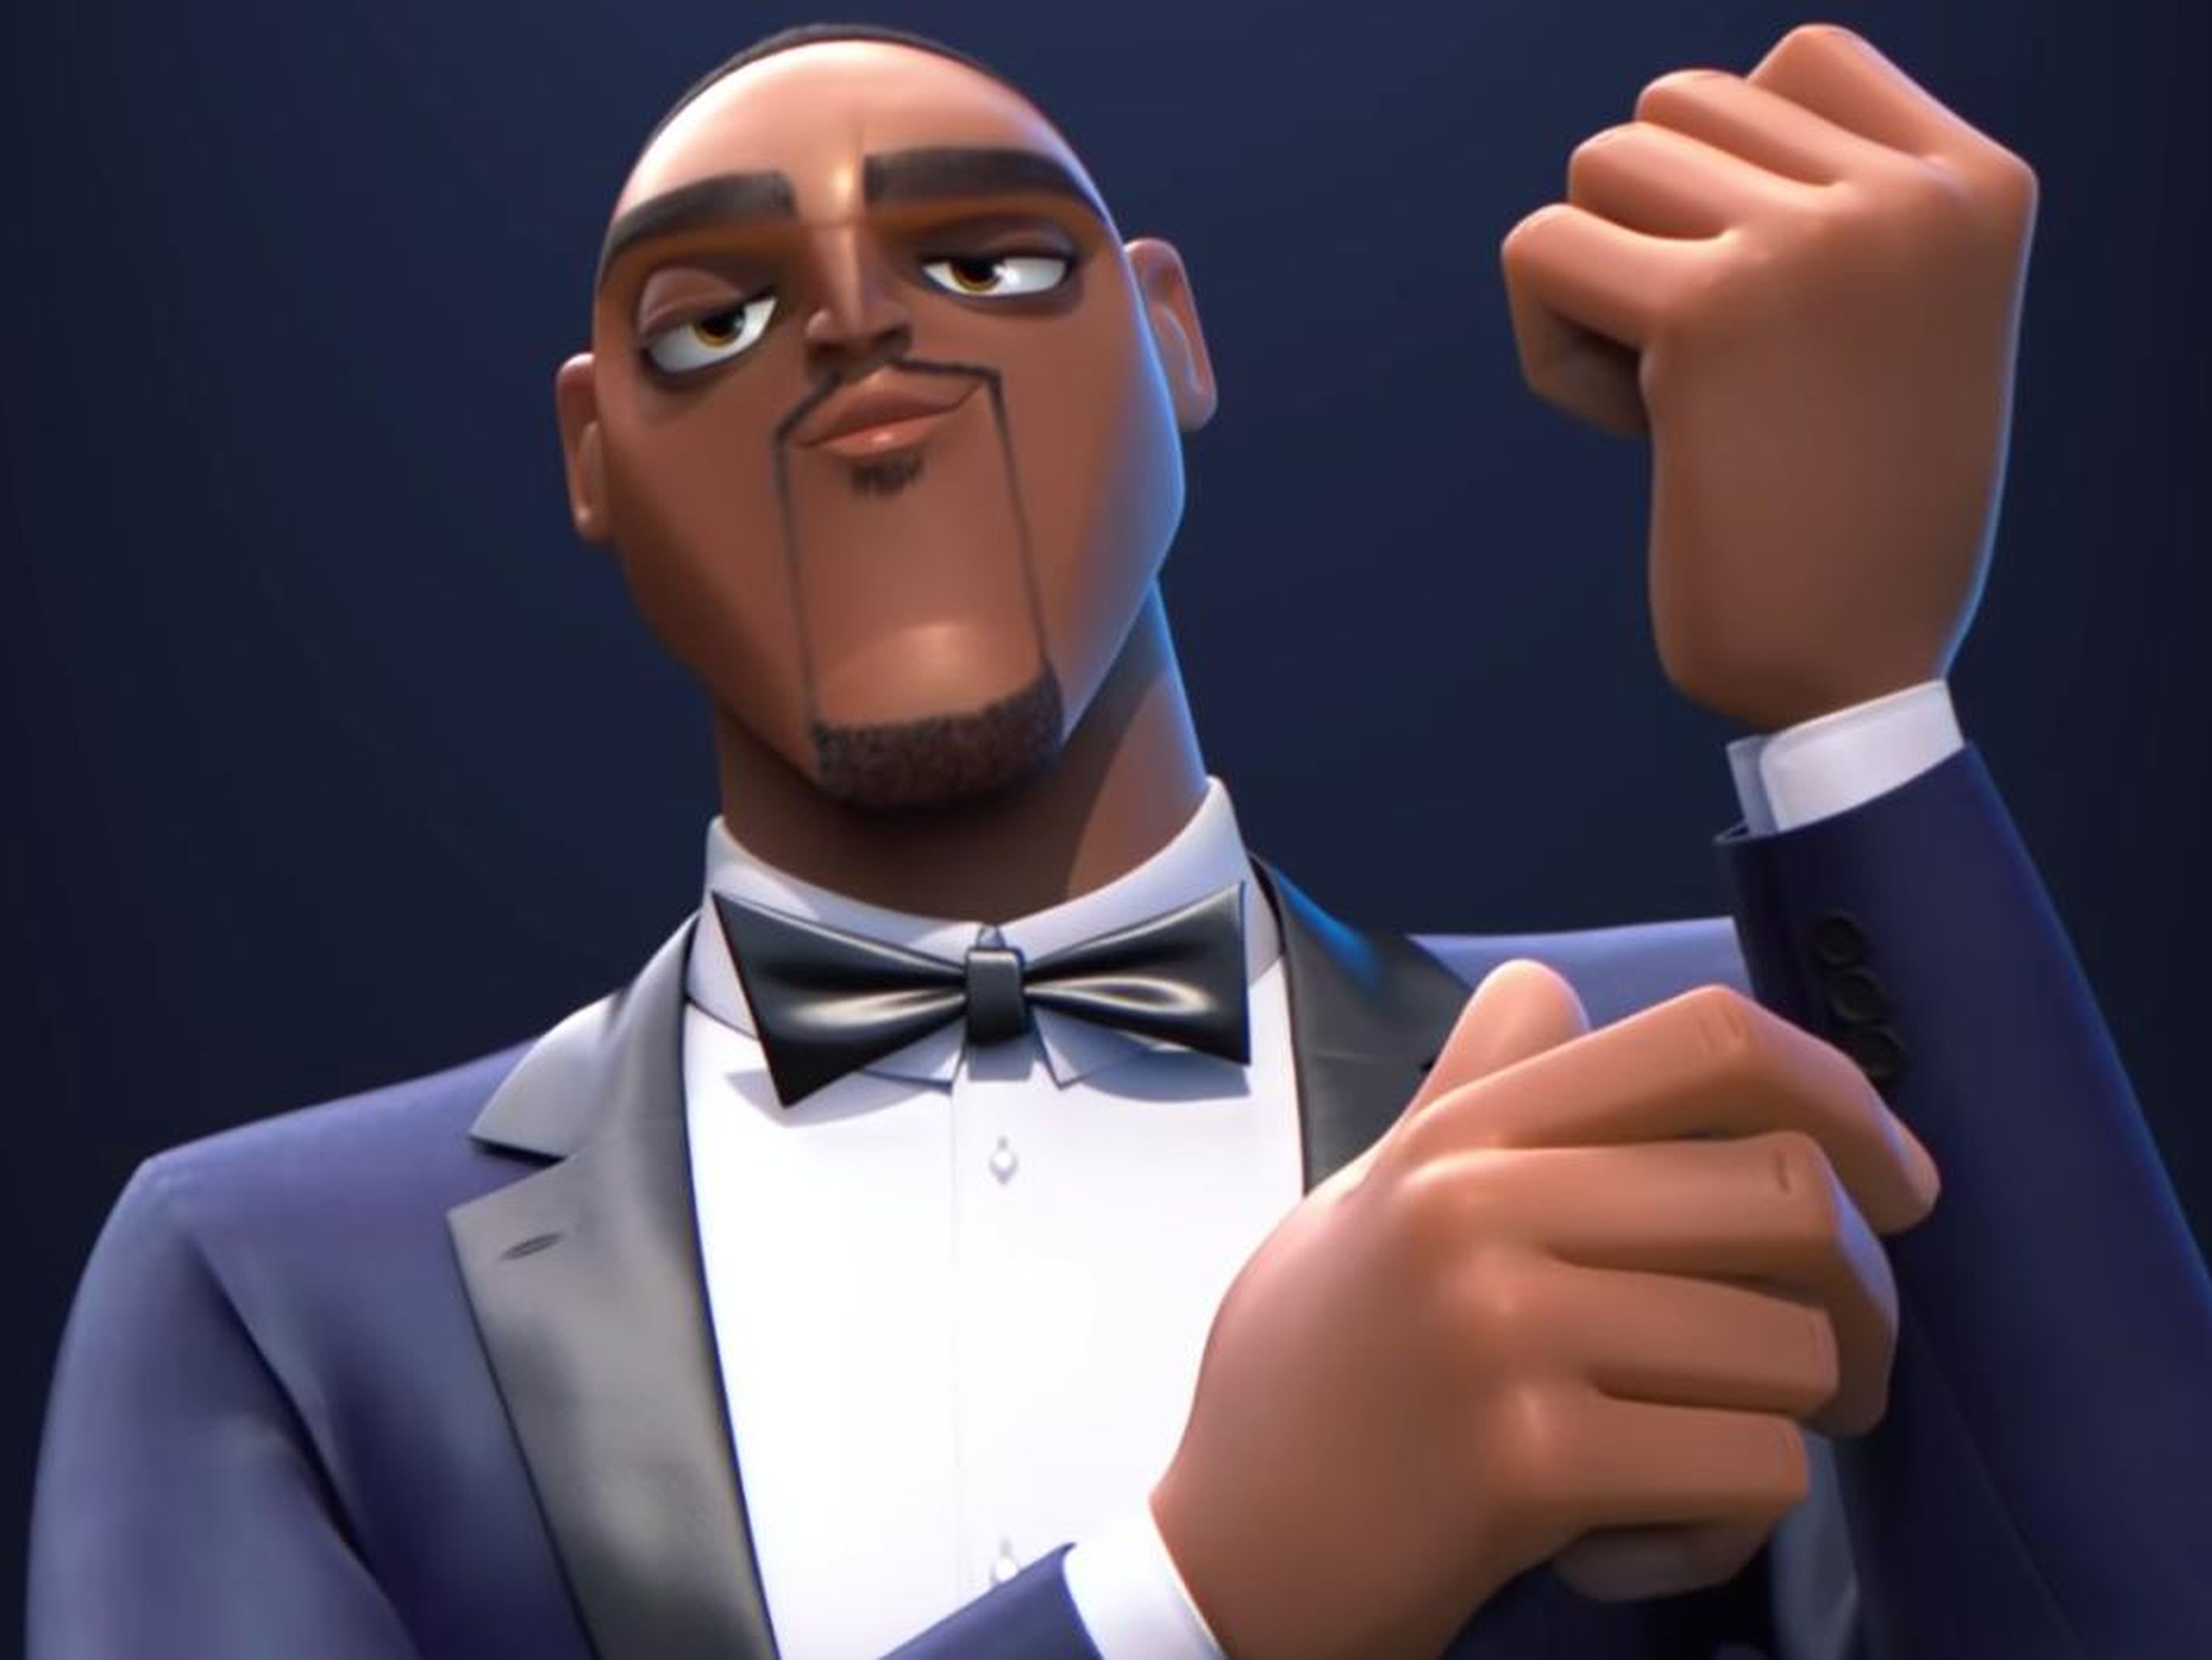 Will Smith stars in "Spies in Disguise."